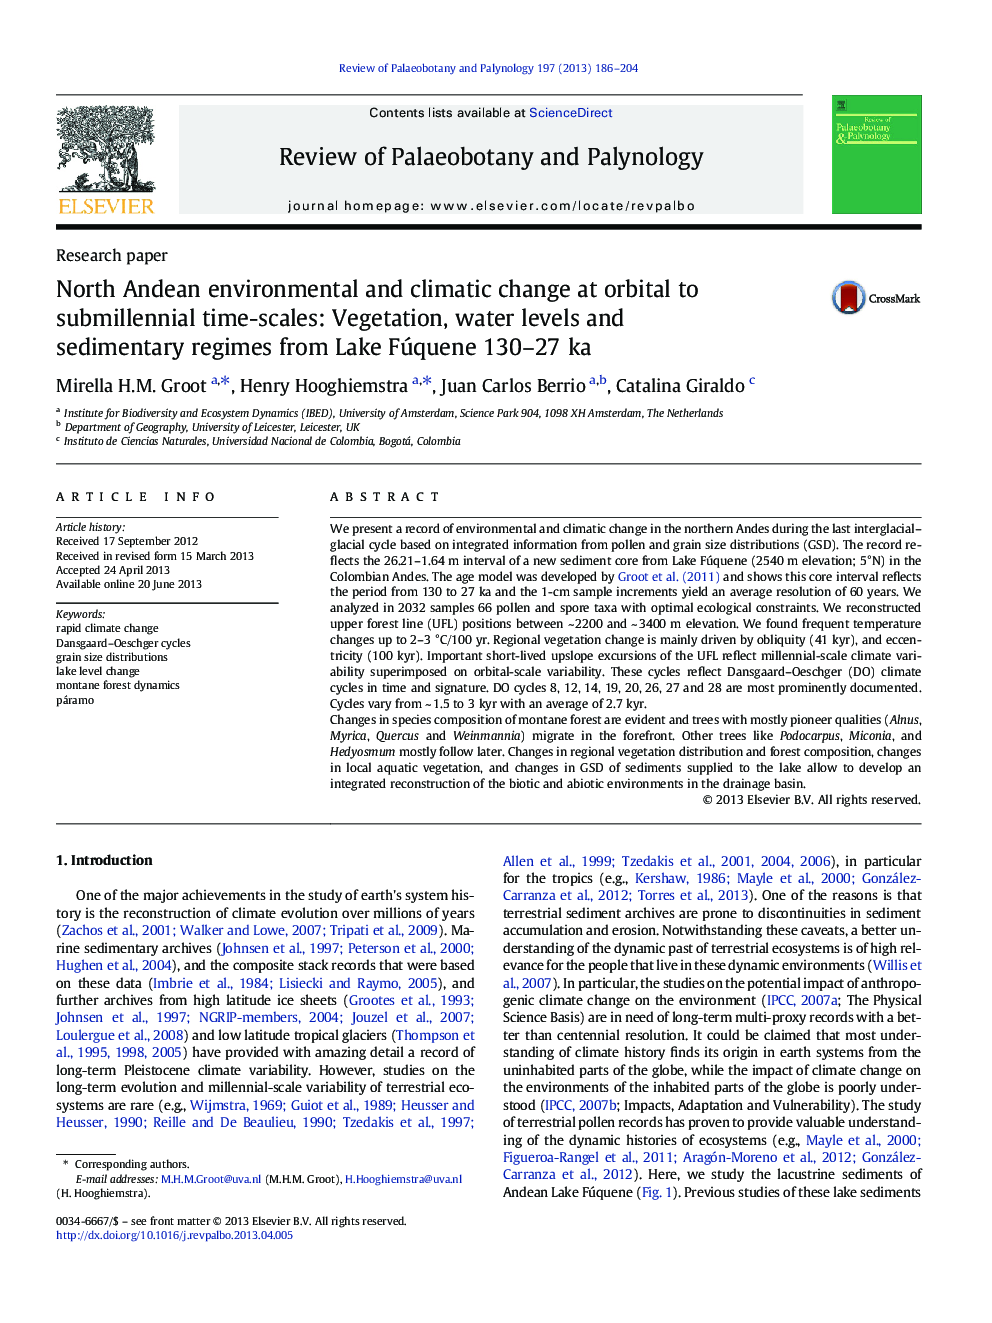 Research paperNorth Andean environmental and climatic change at orbital to submillennial time-scales: Vegetation, water levels and sedimentary regimes from Lake Fúquene 130-27Â ka